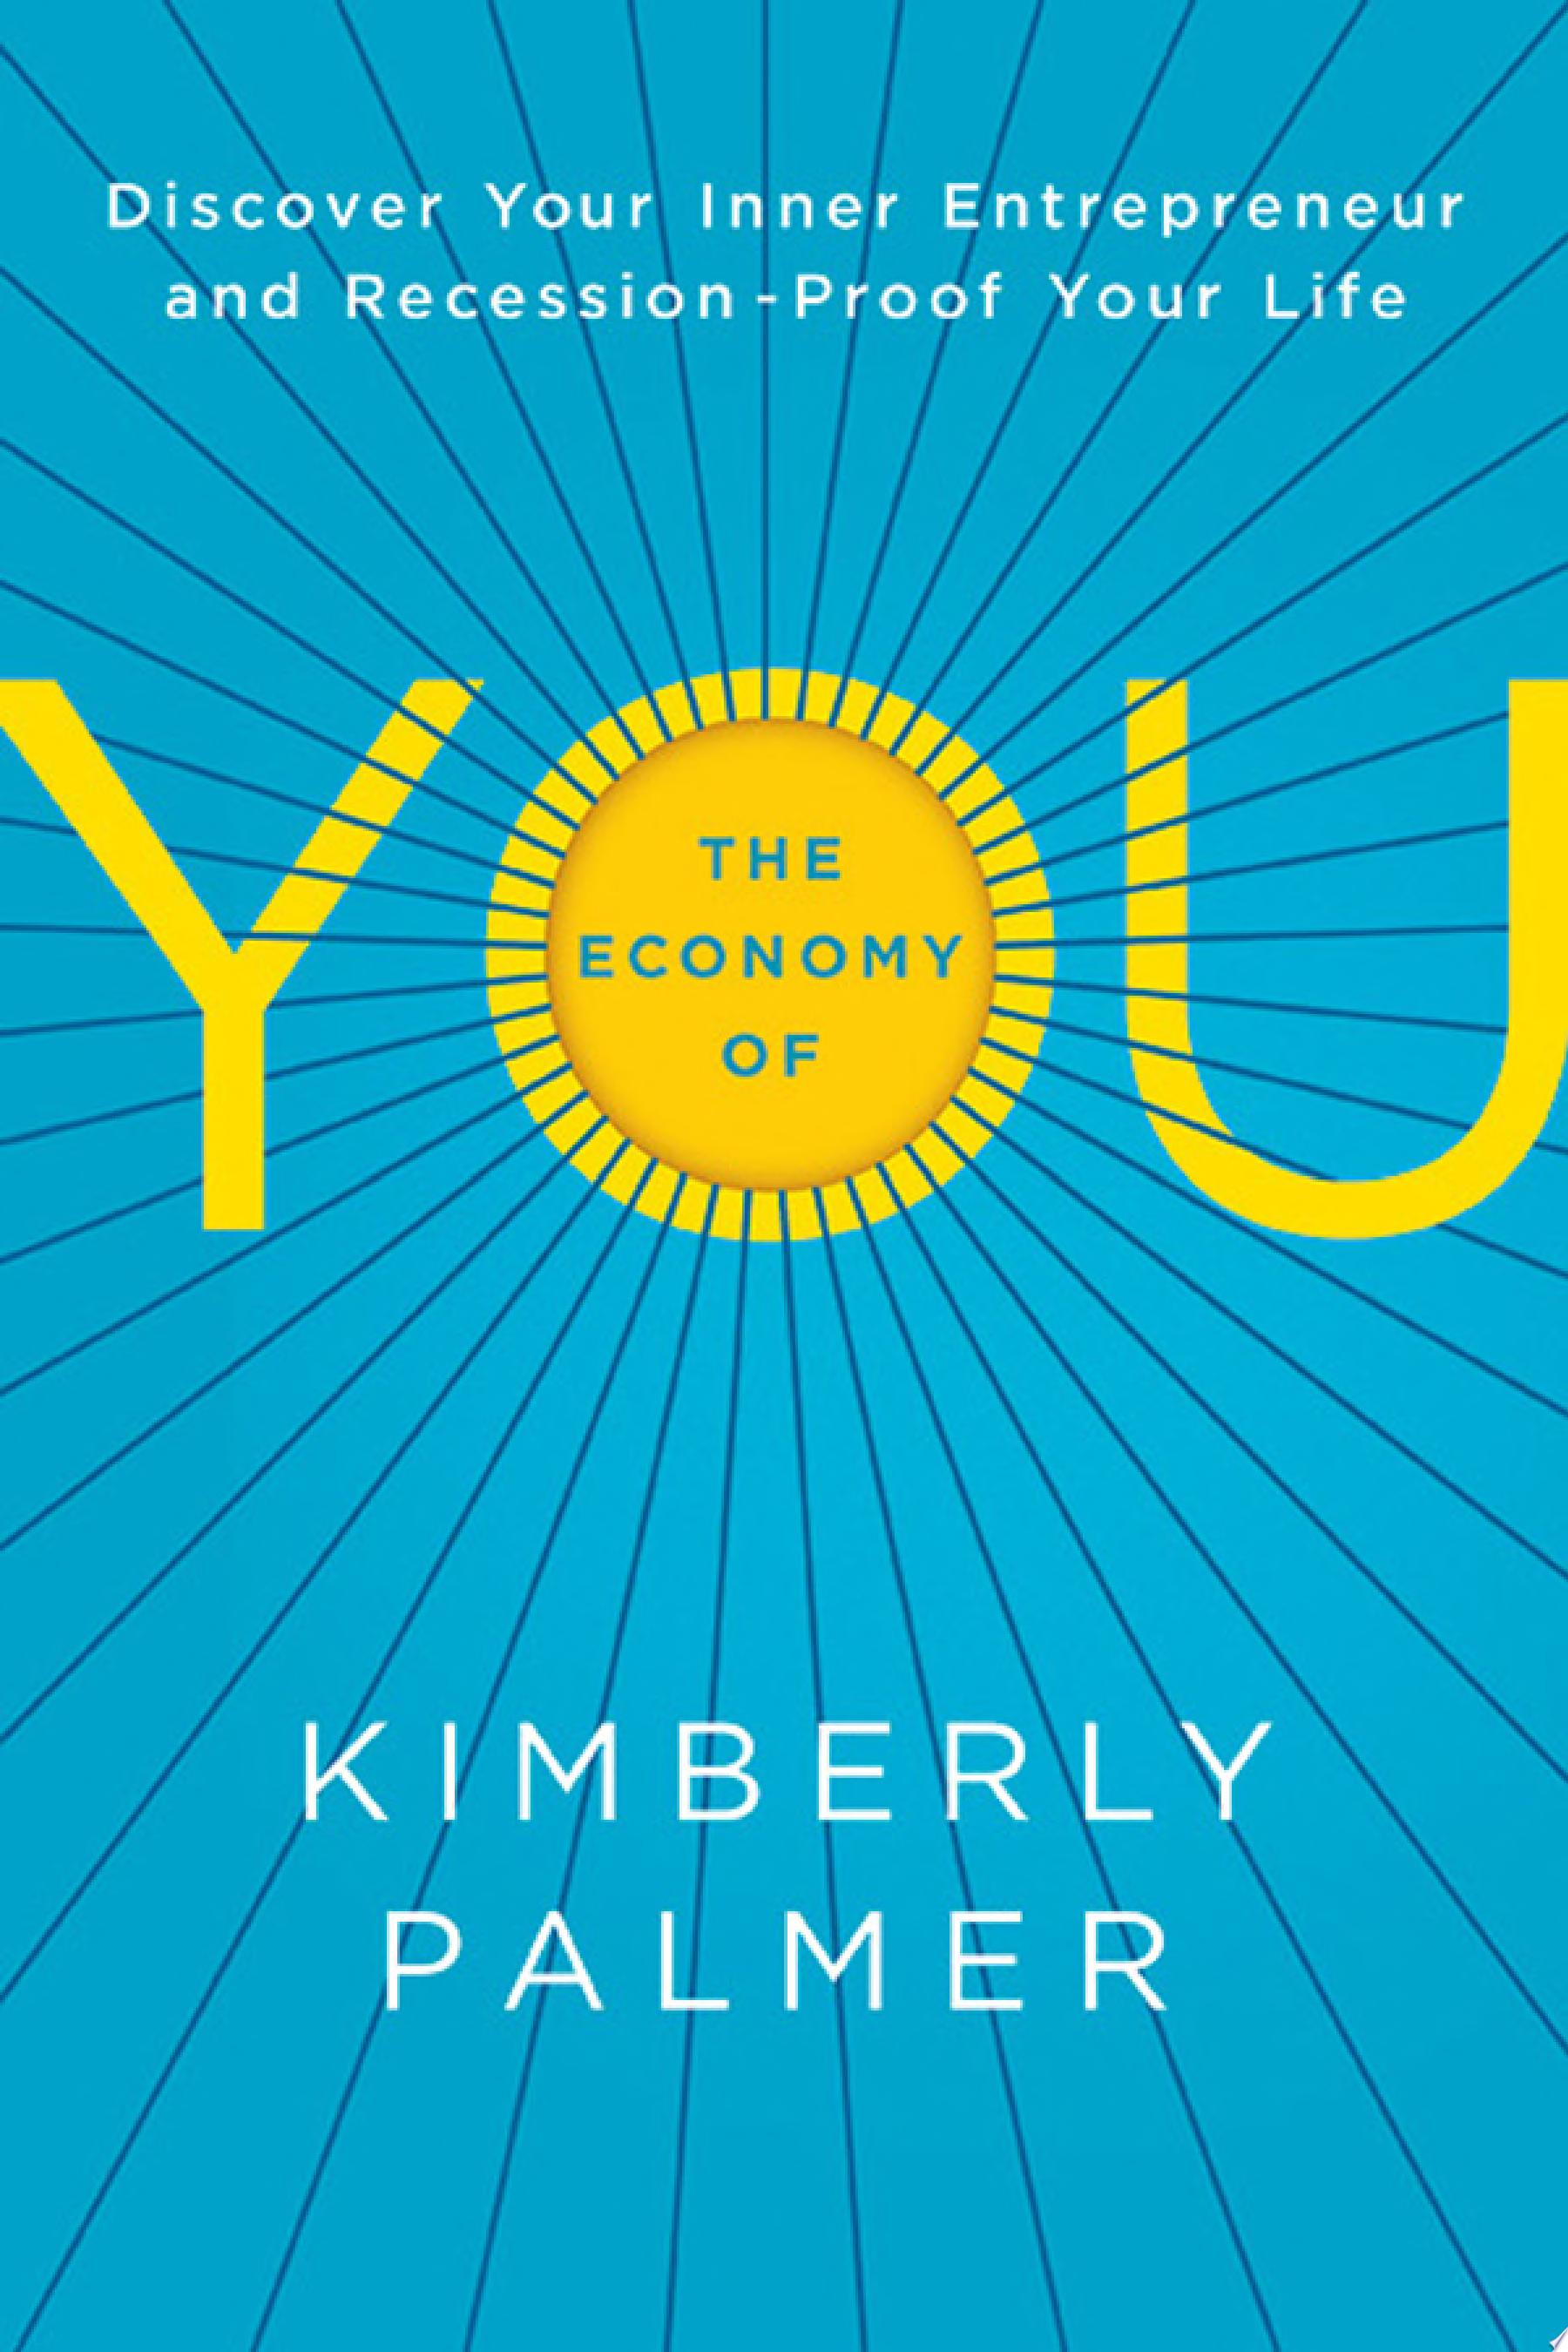 Image for "The Economy of You"